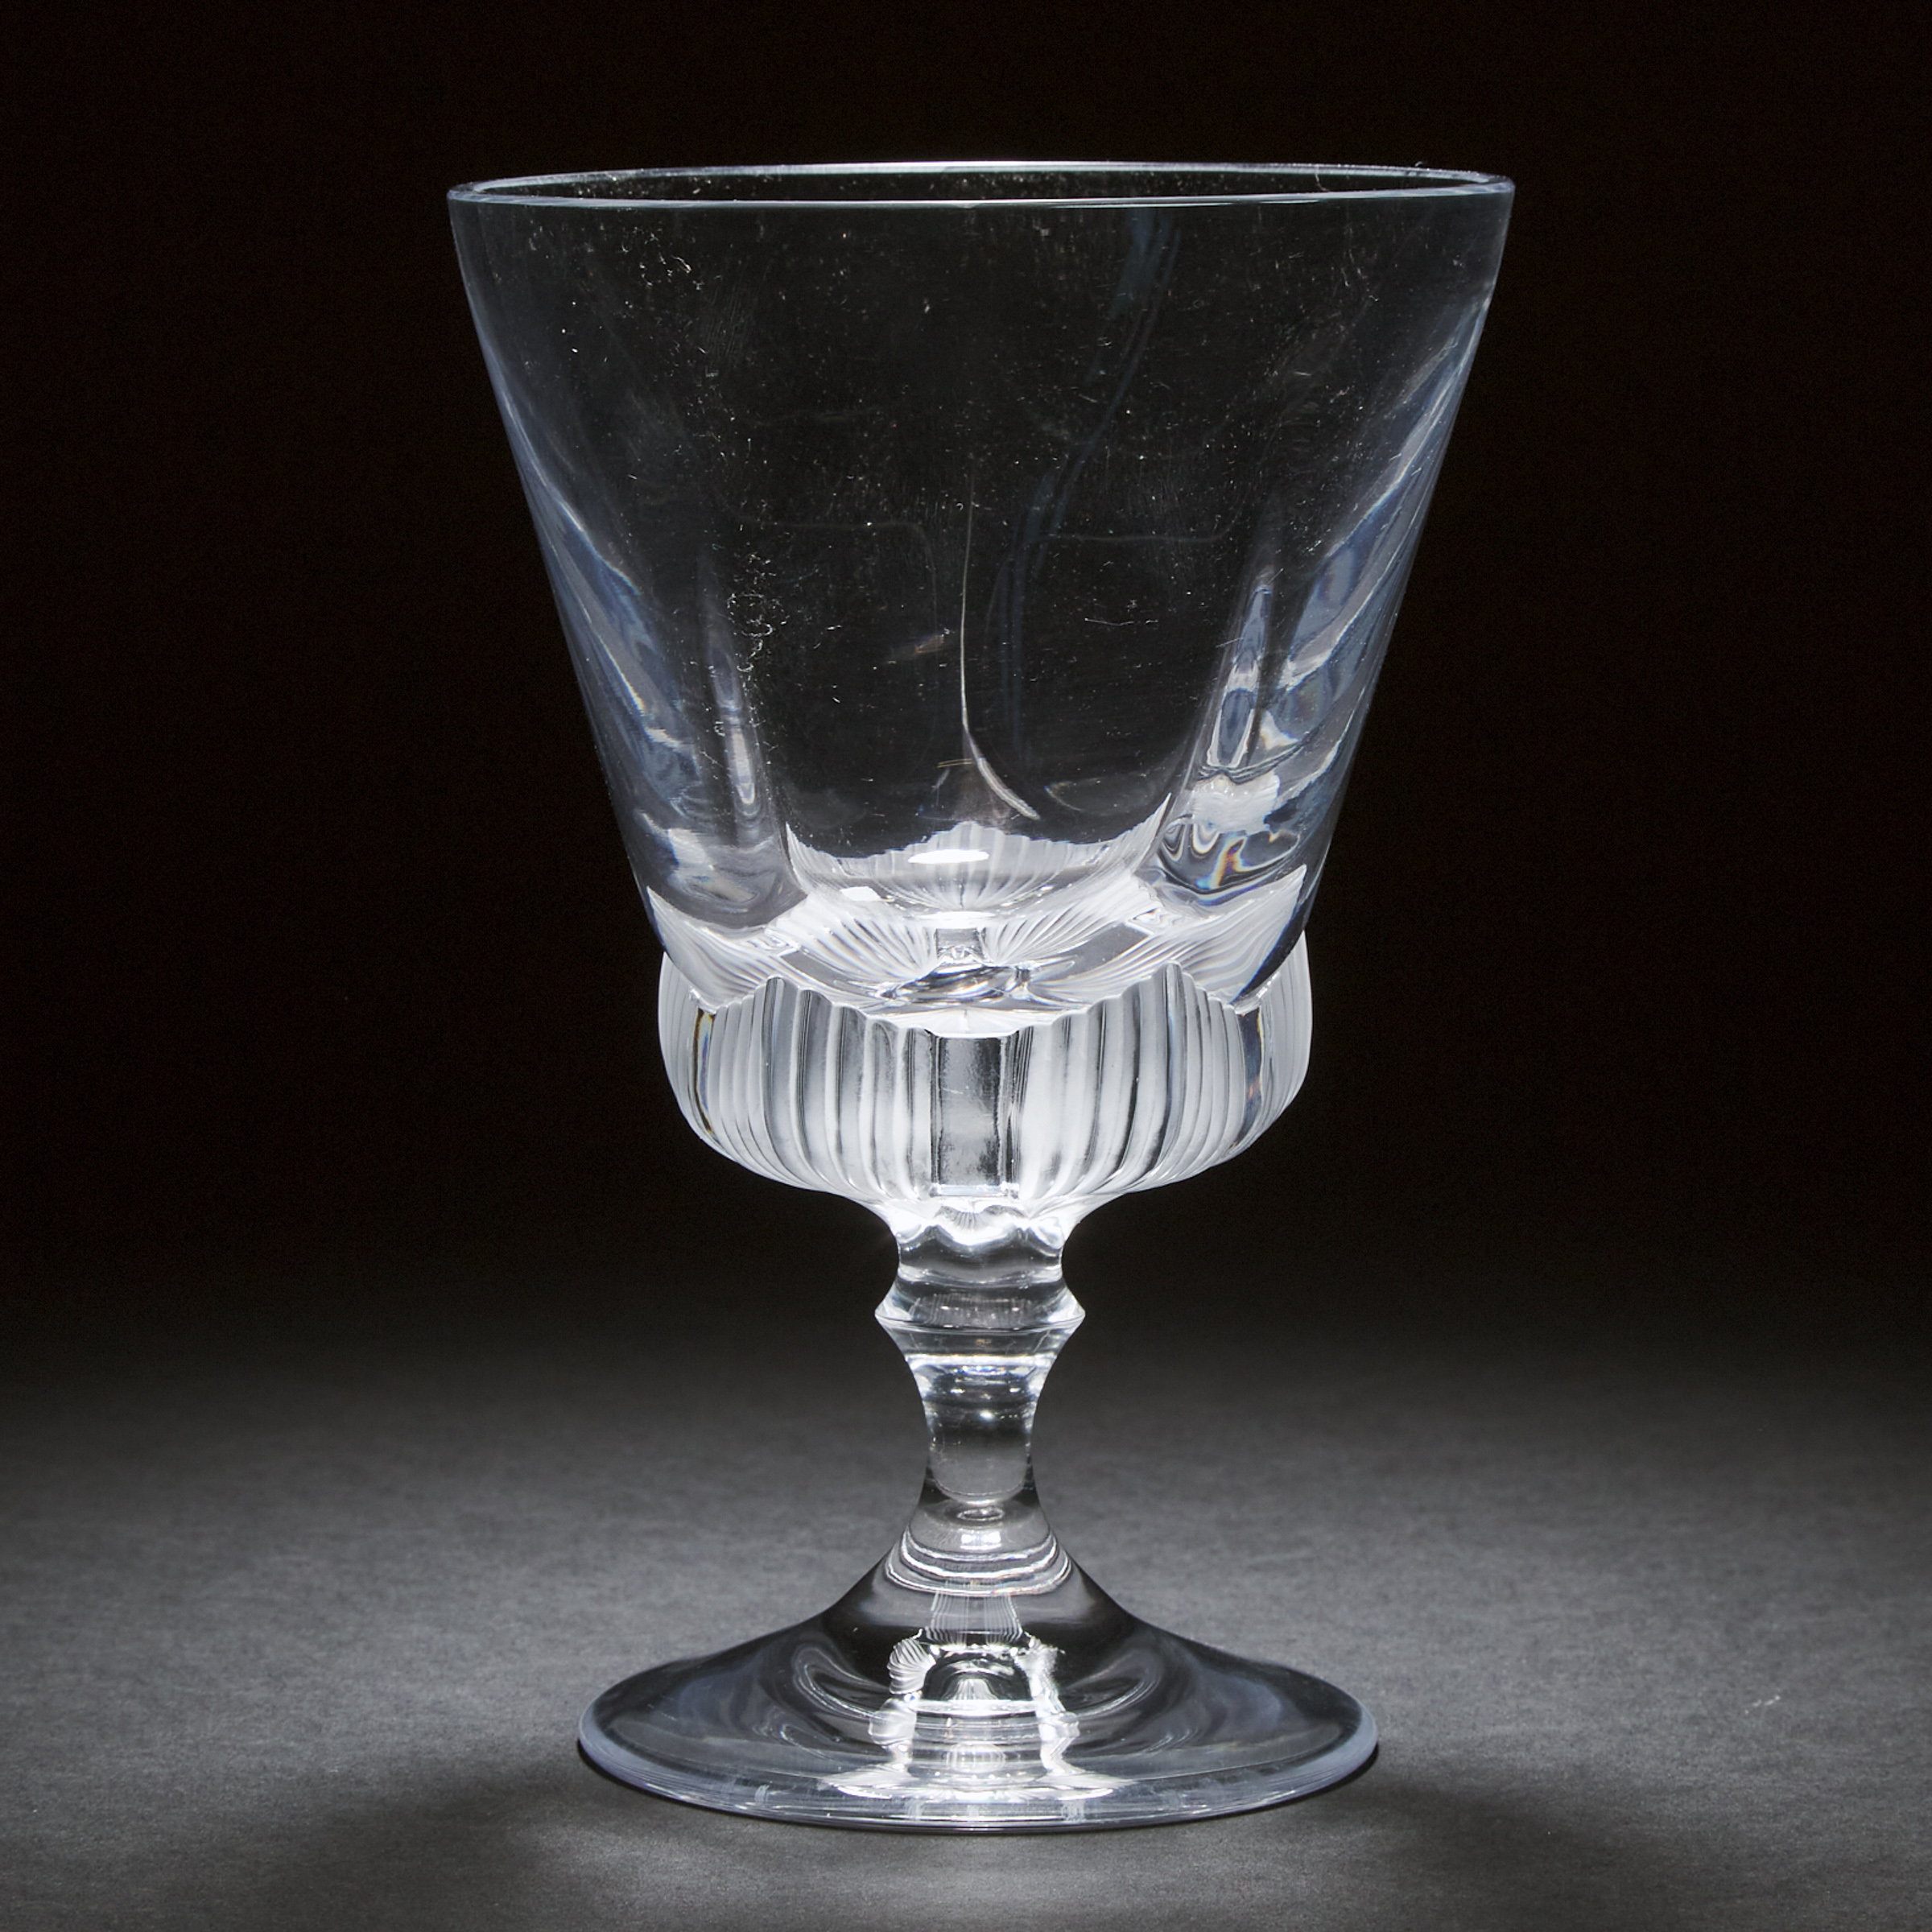 'Cleves', Lalique Moulded and Partly Frosted Glass Goblet-Form Vase, 20th century